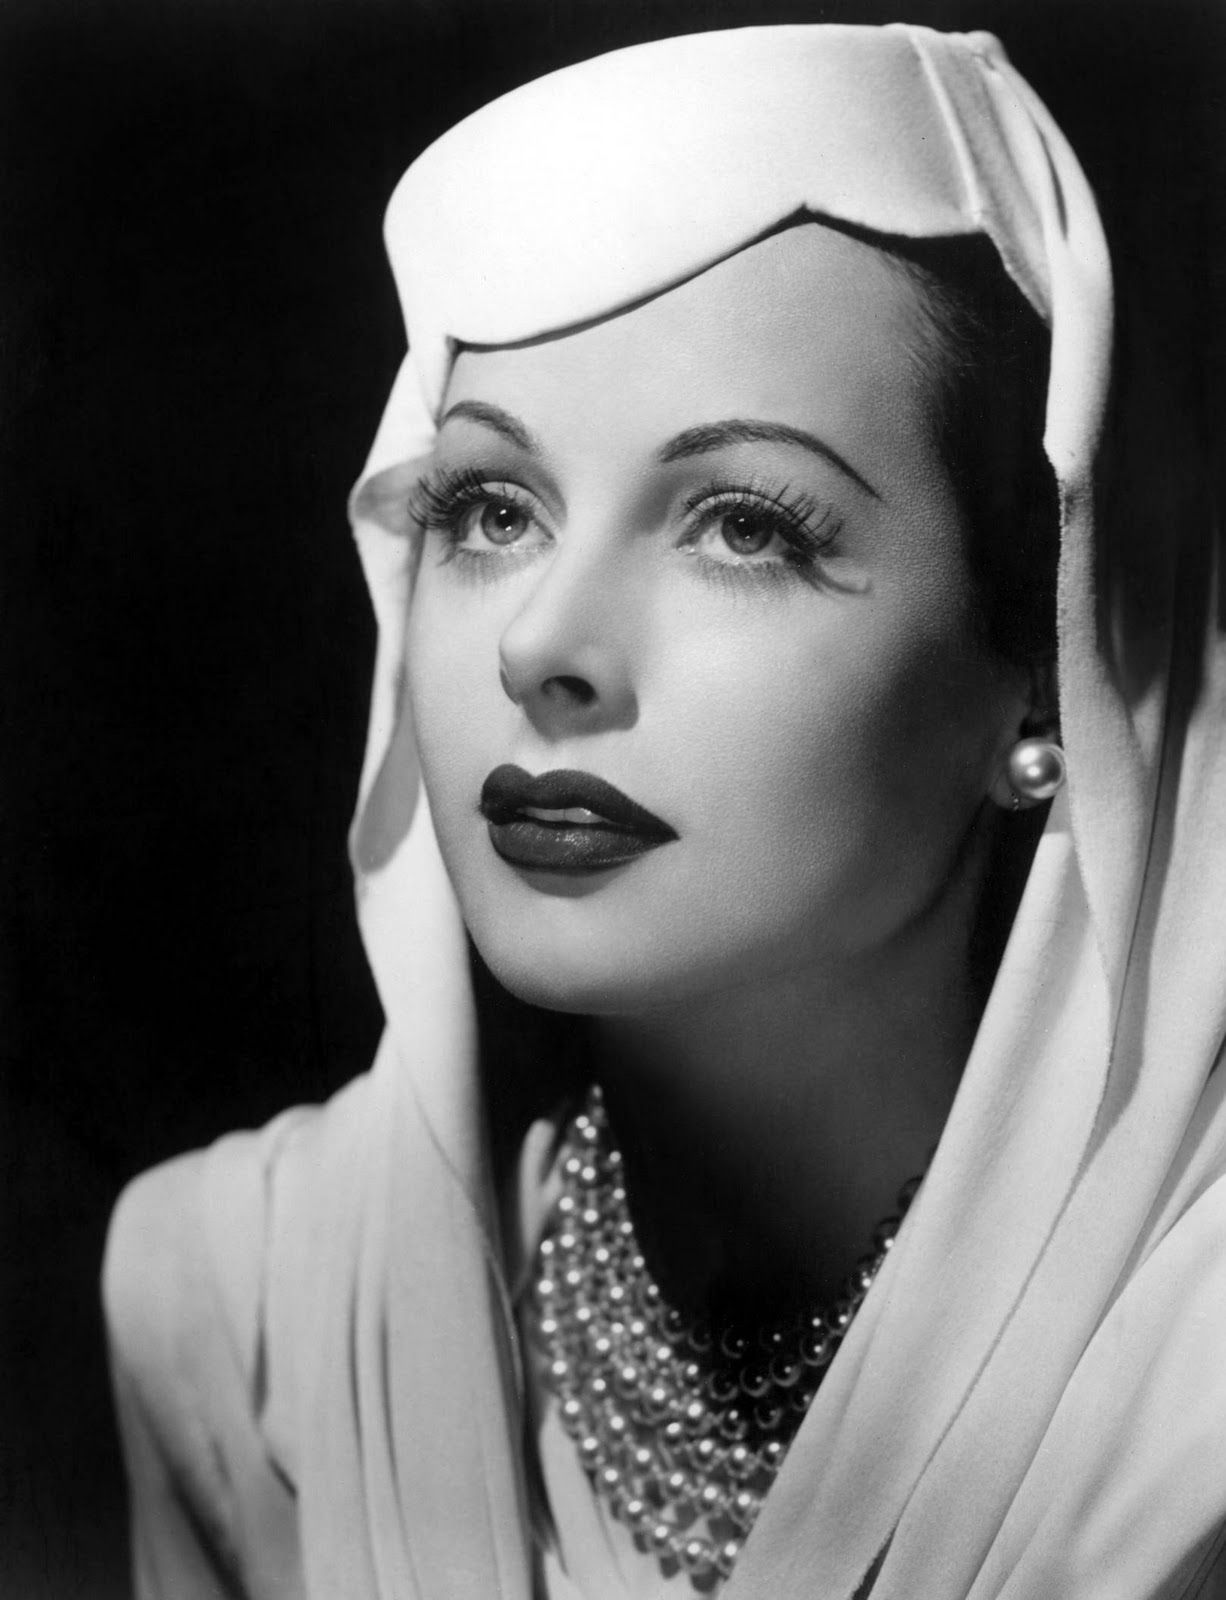 Image Xtreme Great: Hedy Lamarr